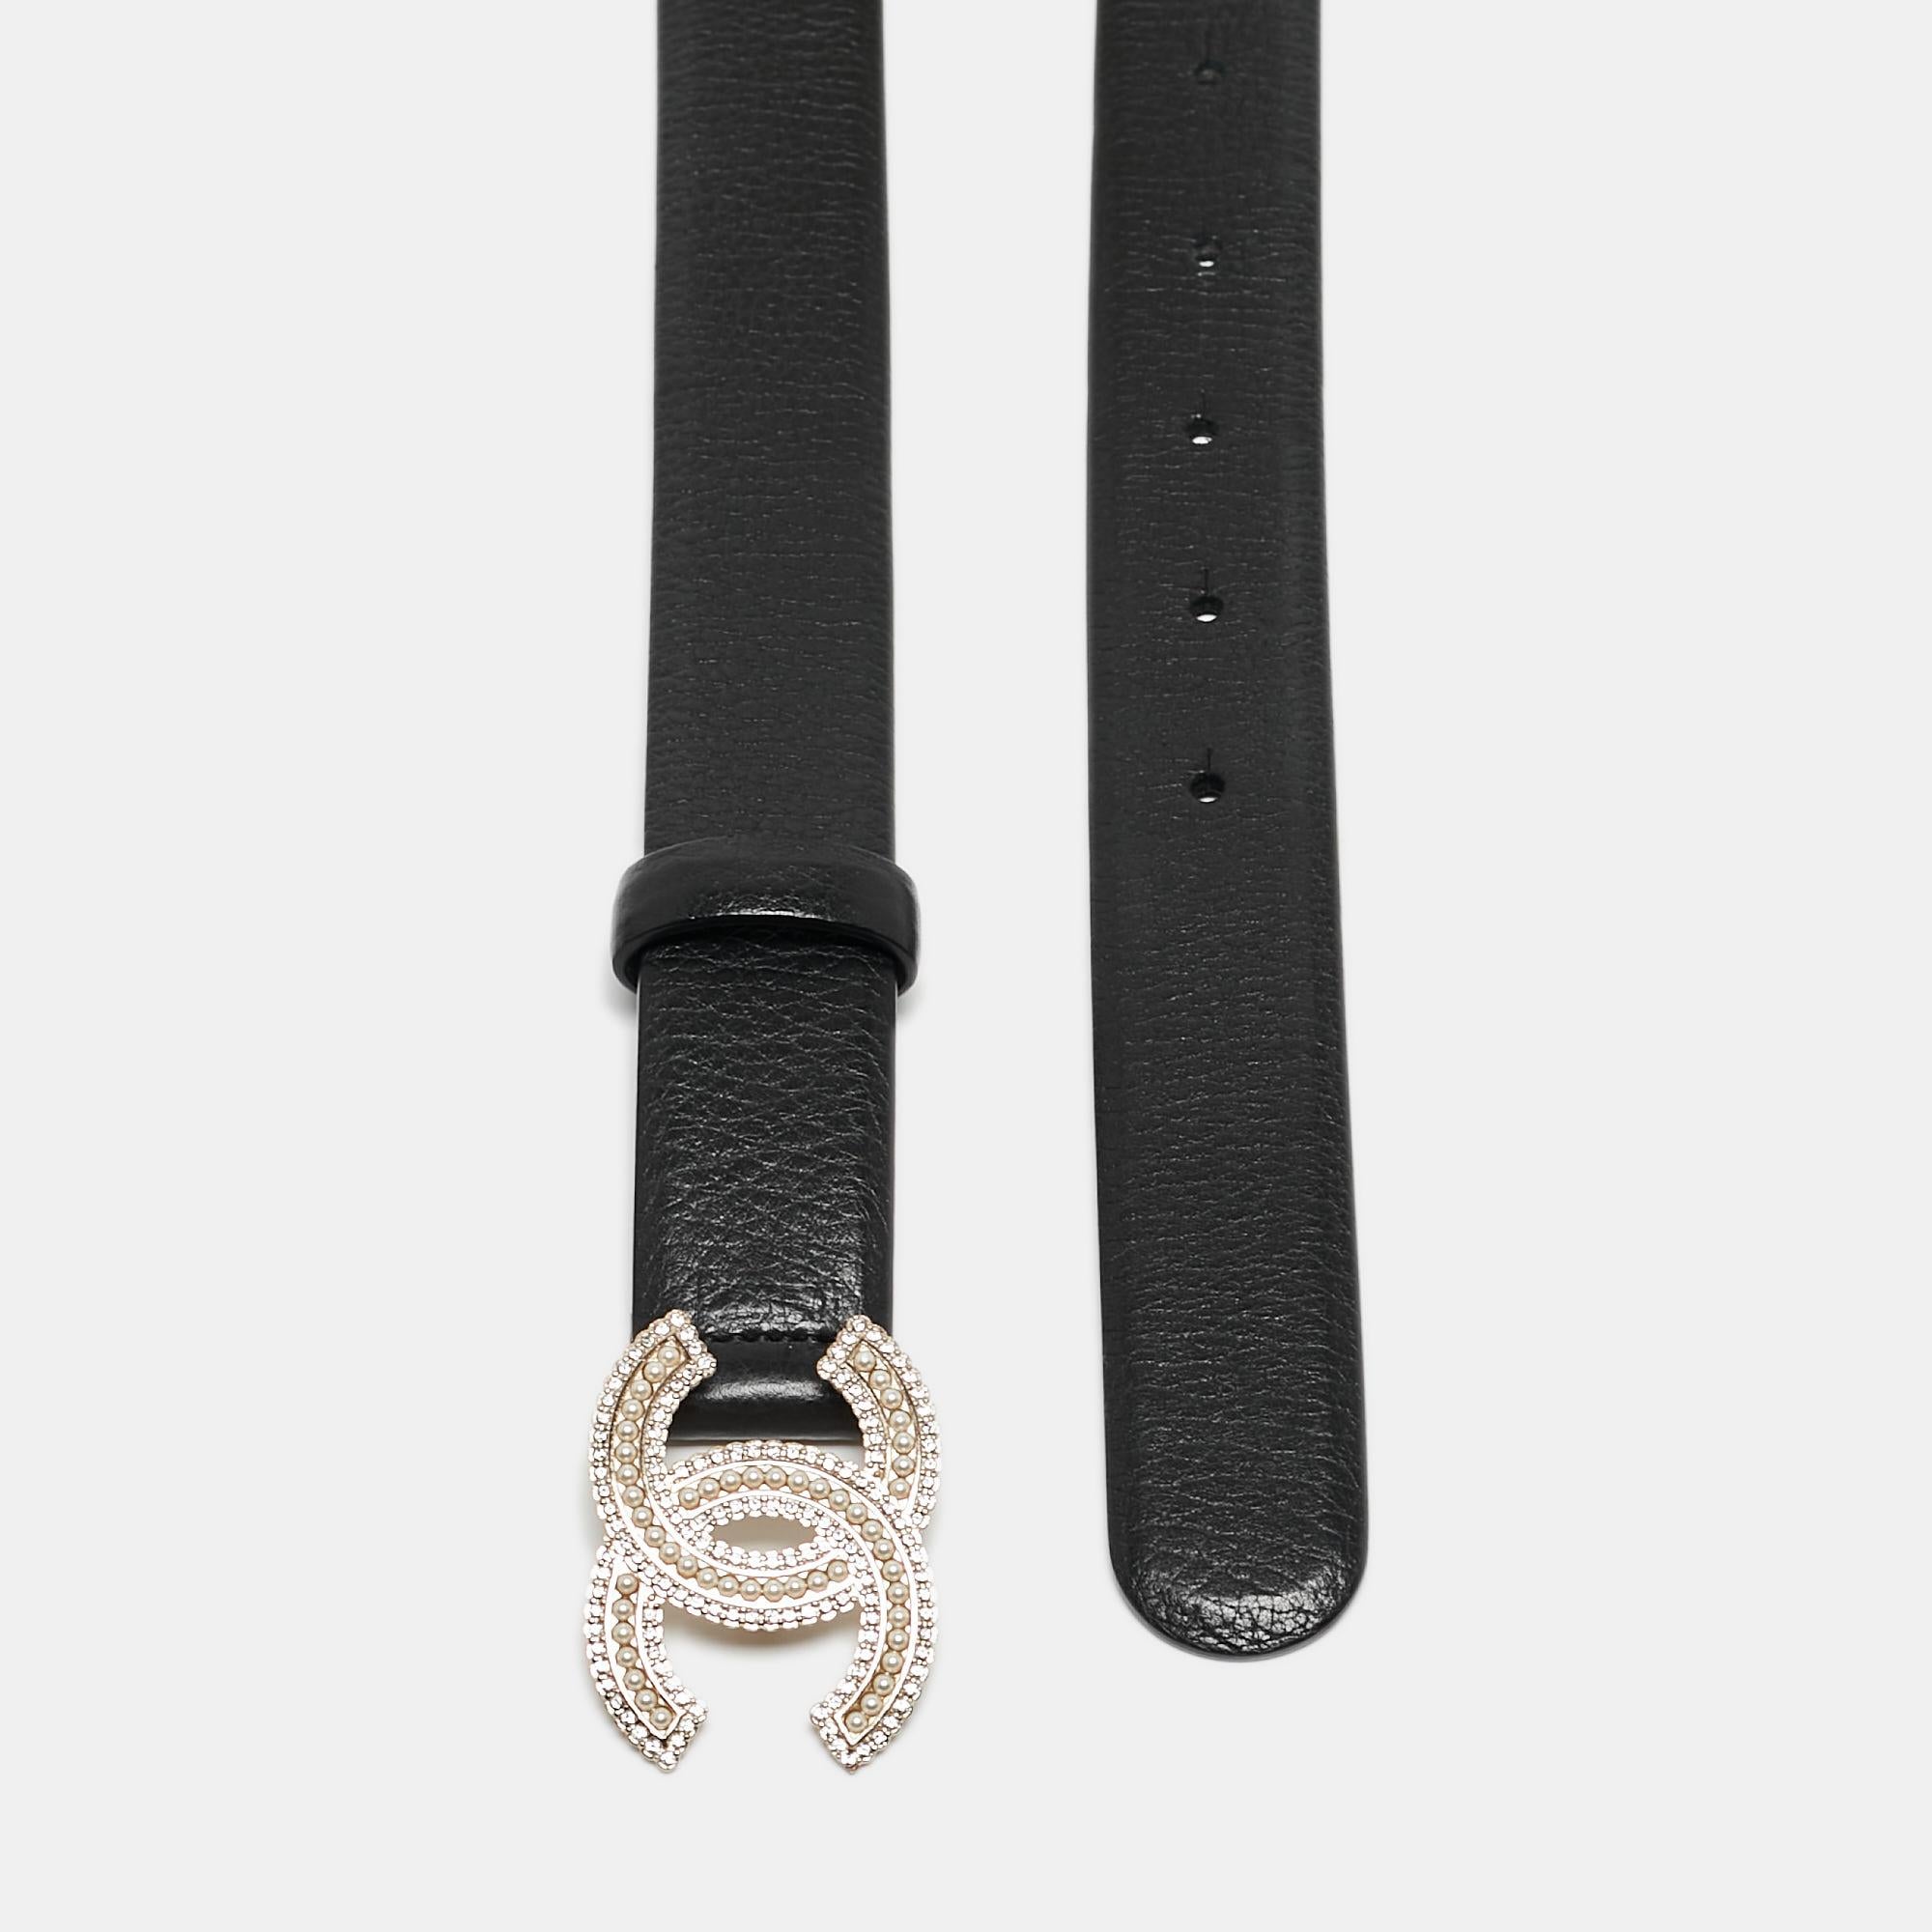 A classic add-on to your collection of belts is this designer piece. Cut to a convenient length, the belt has a smooth finish and a sturdy built. It will continually complement your style.

Includes: Original Box